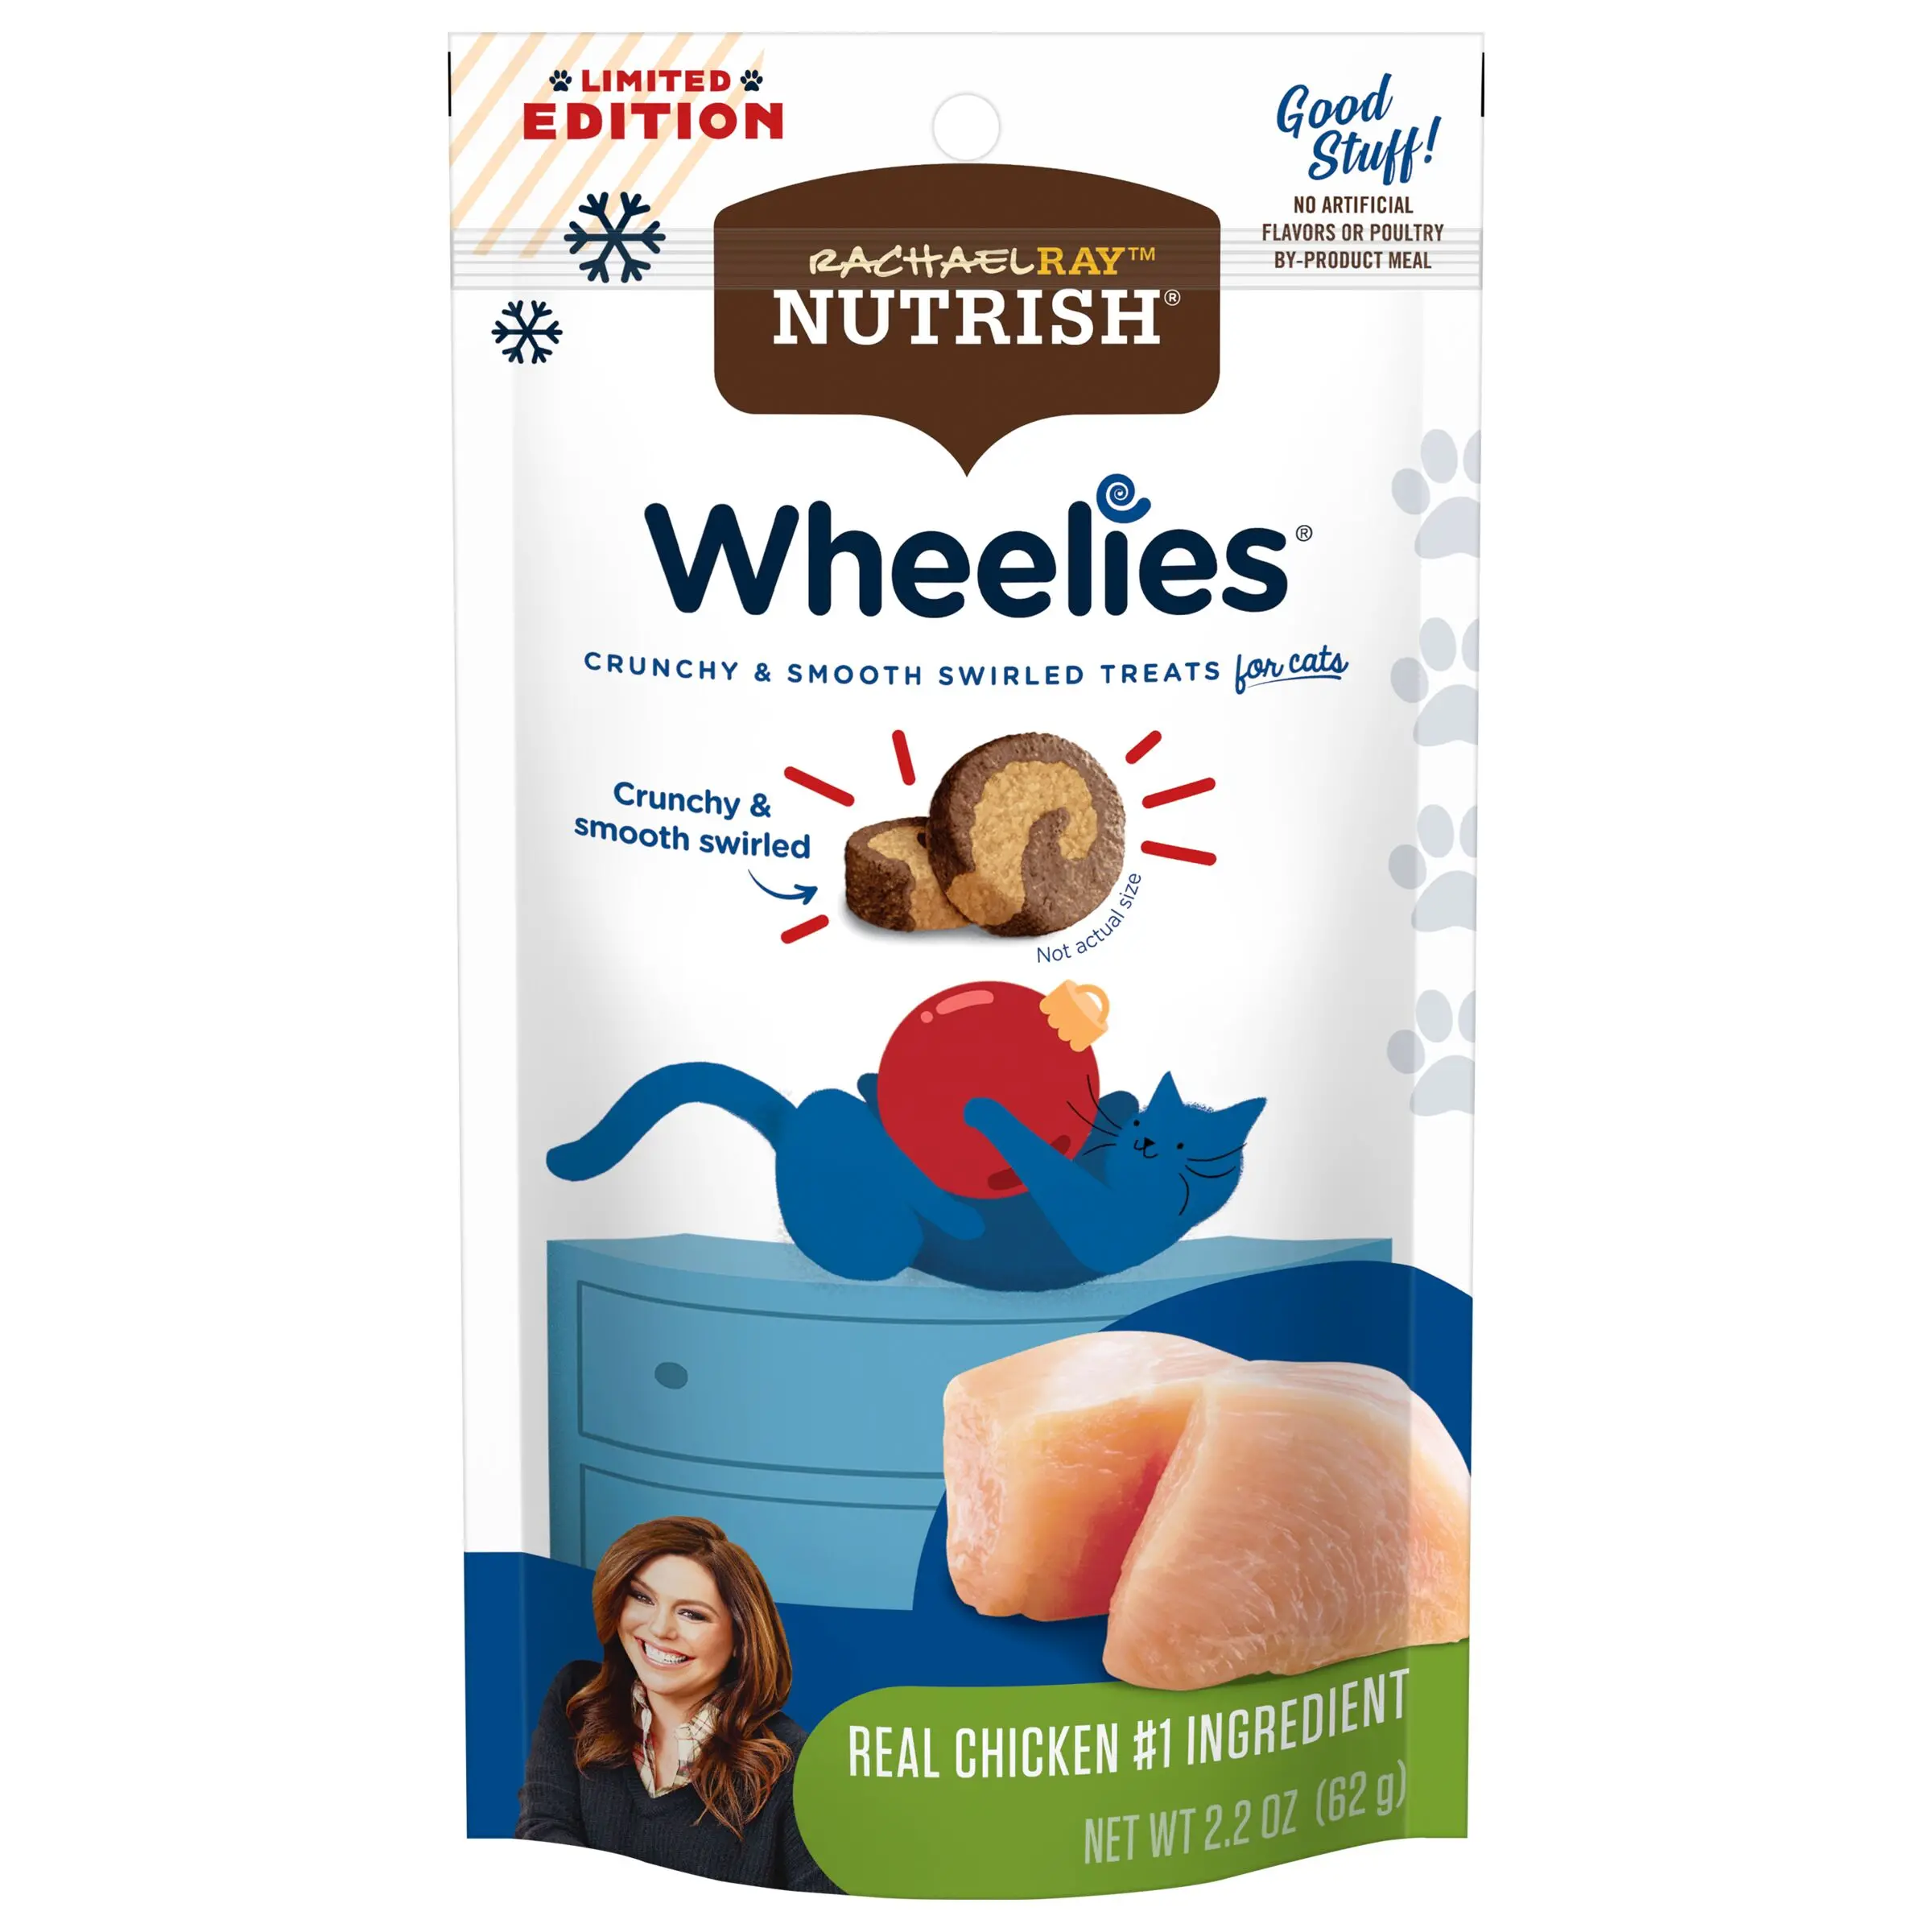 Rachael Ray Nutrish Wheelies, Chicken, with holiday packaging